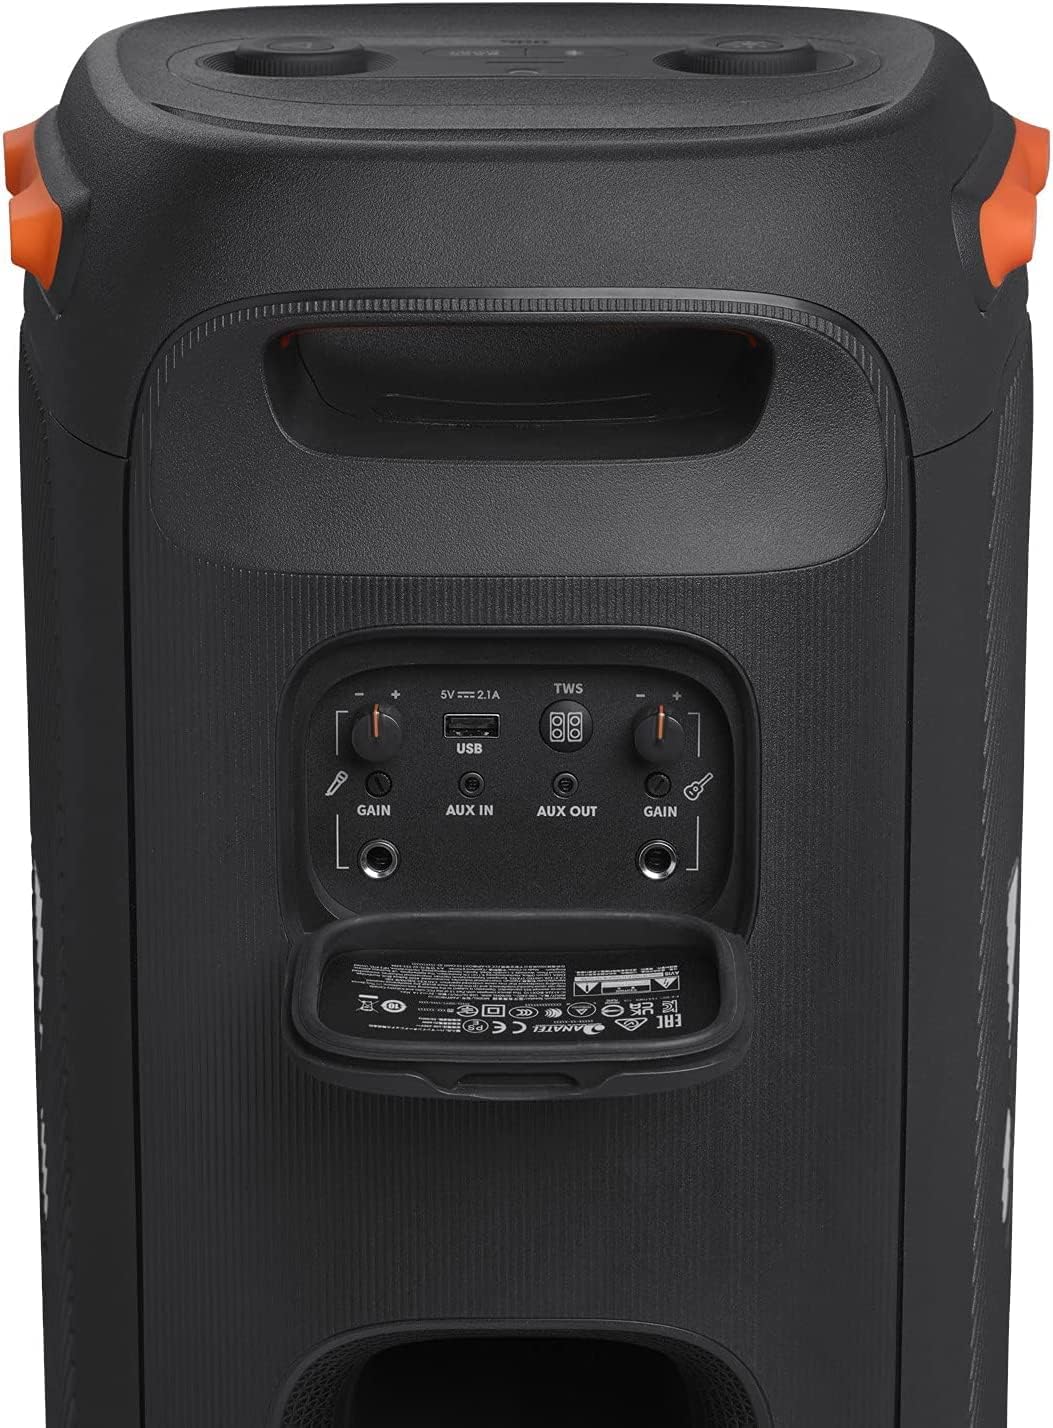 JBL PartyBox 110 Portable Party Speaker with Built-in Lights - Black (Certified Refurbished)